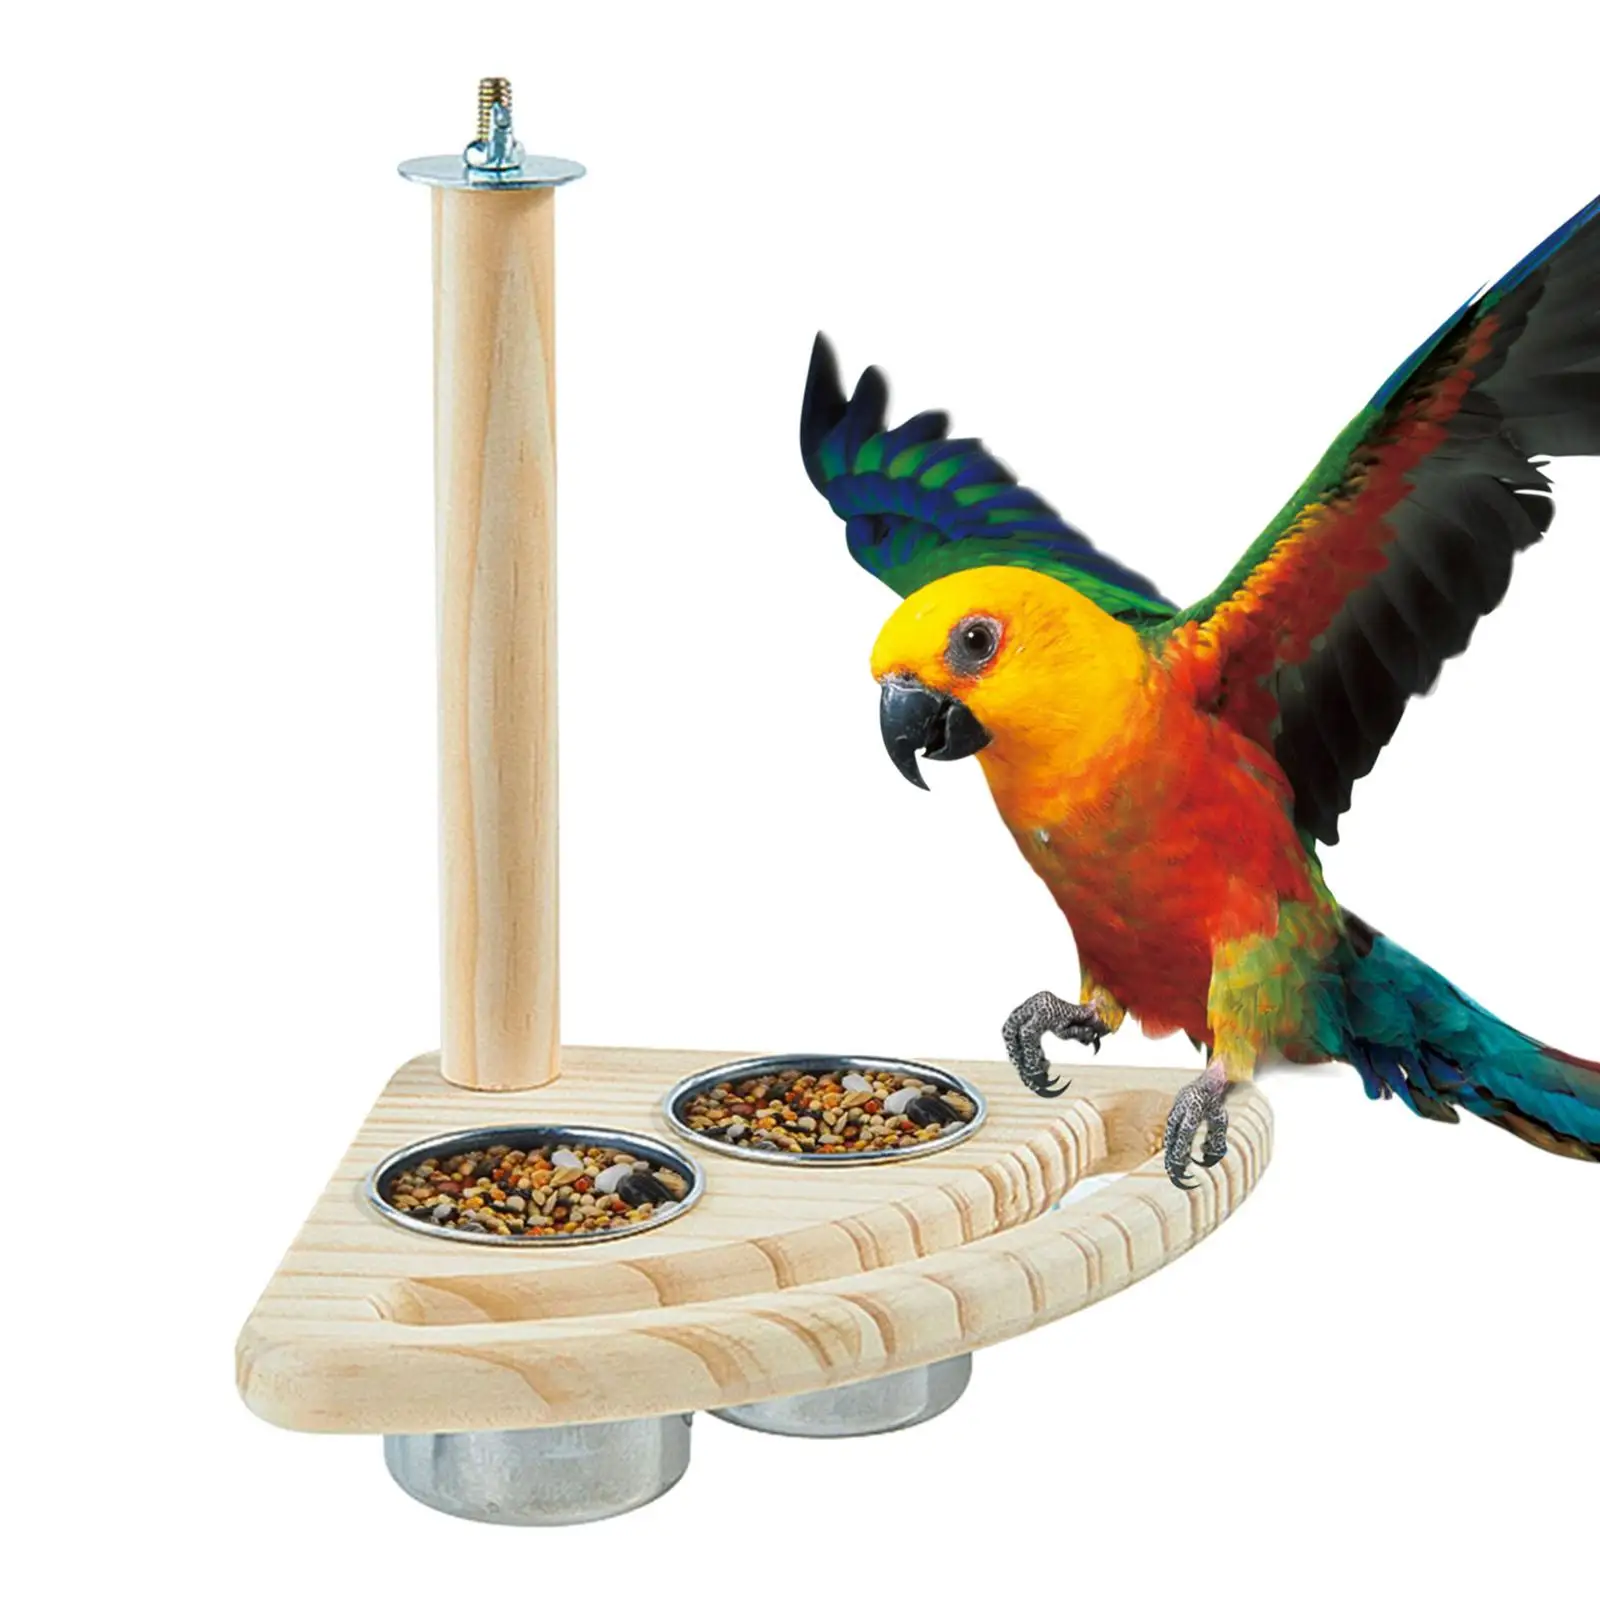 Bird Perch with 2 Stainless Steel Bowls Feeding and Watering Supplies Birds Cage Accessory for Medium Large Small Cockatiels